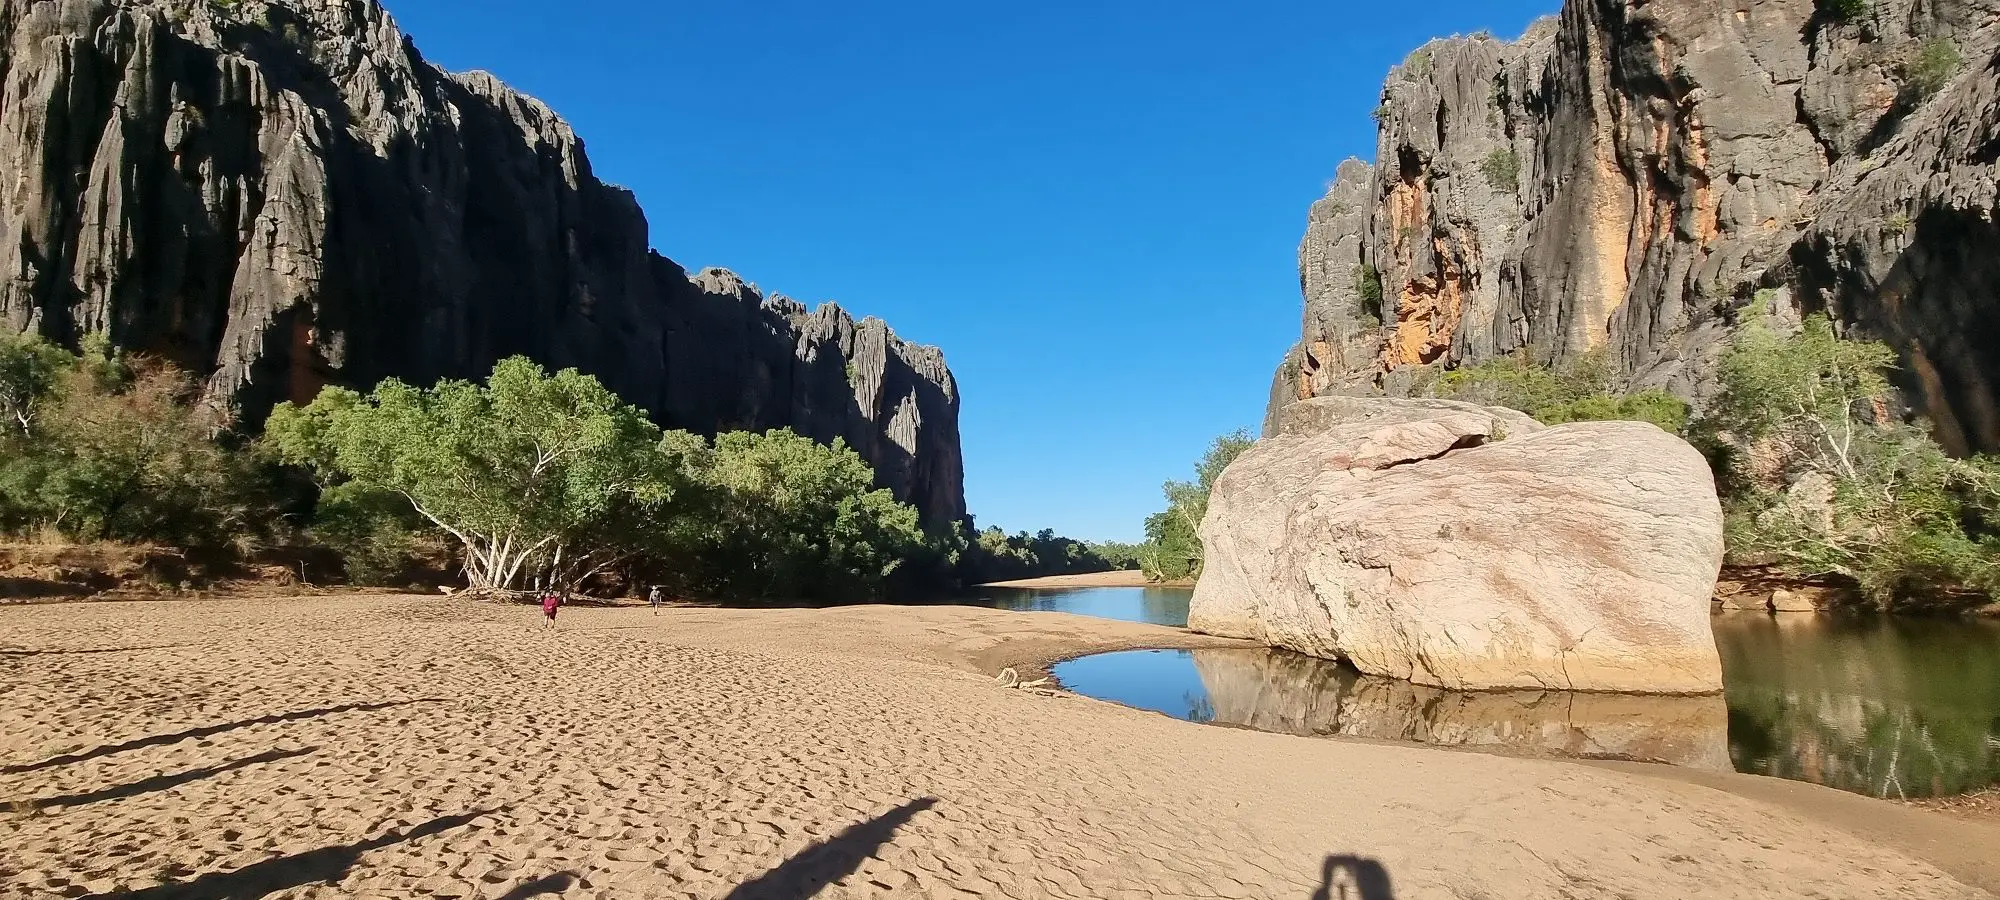 Windjana gorge features a sandy looking beach with large boulders and a creek - Broome itinerary